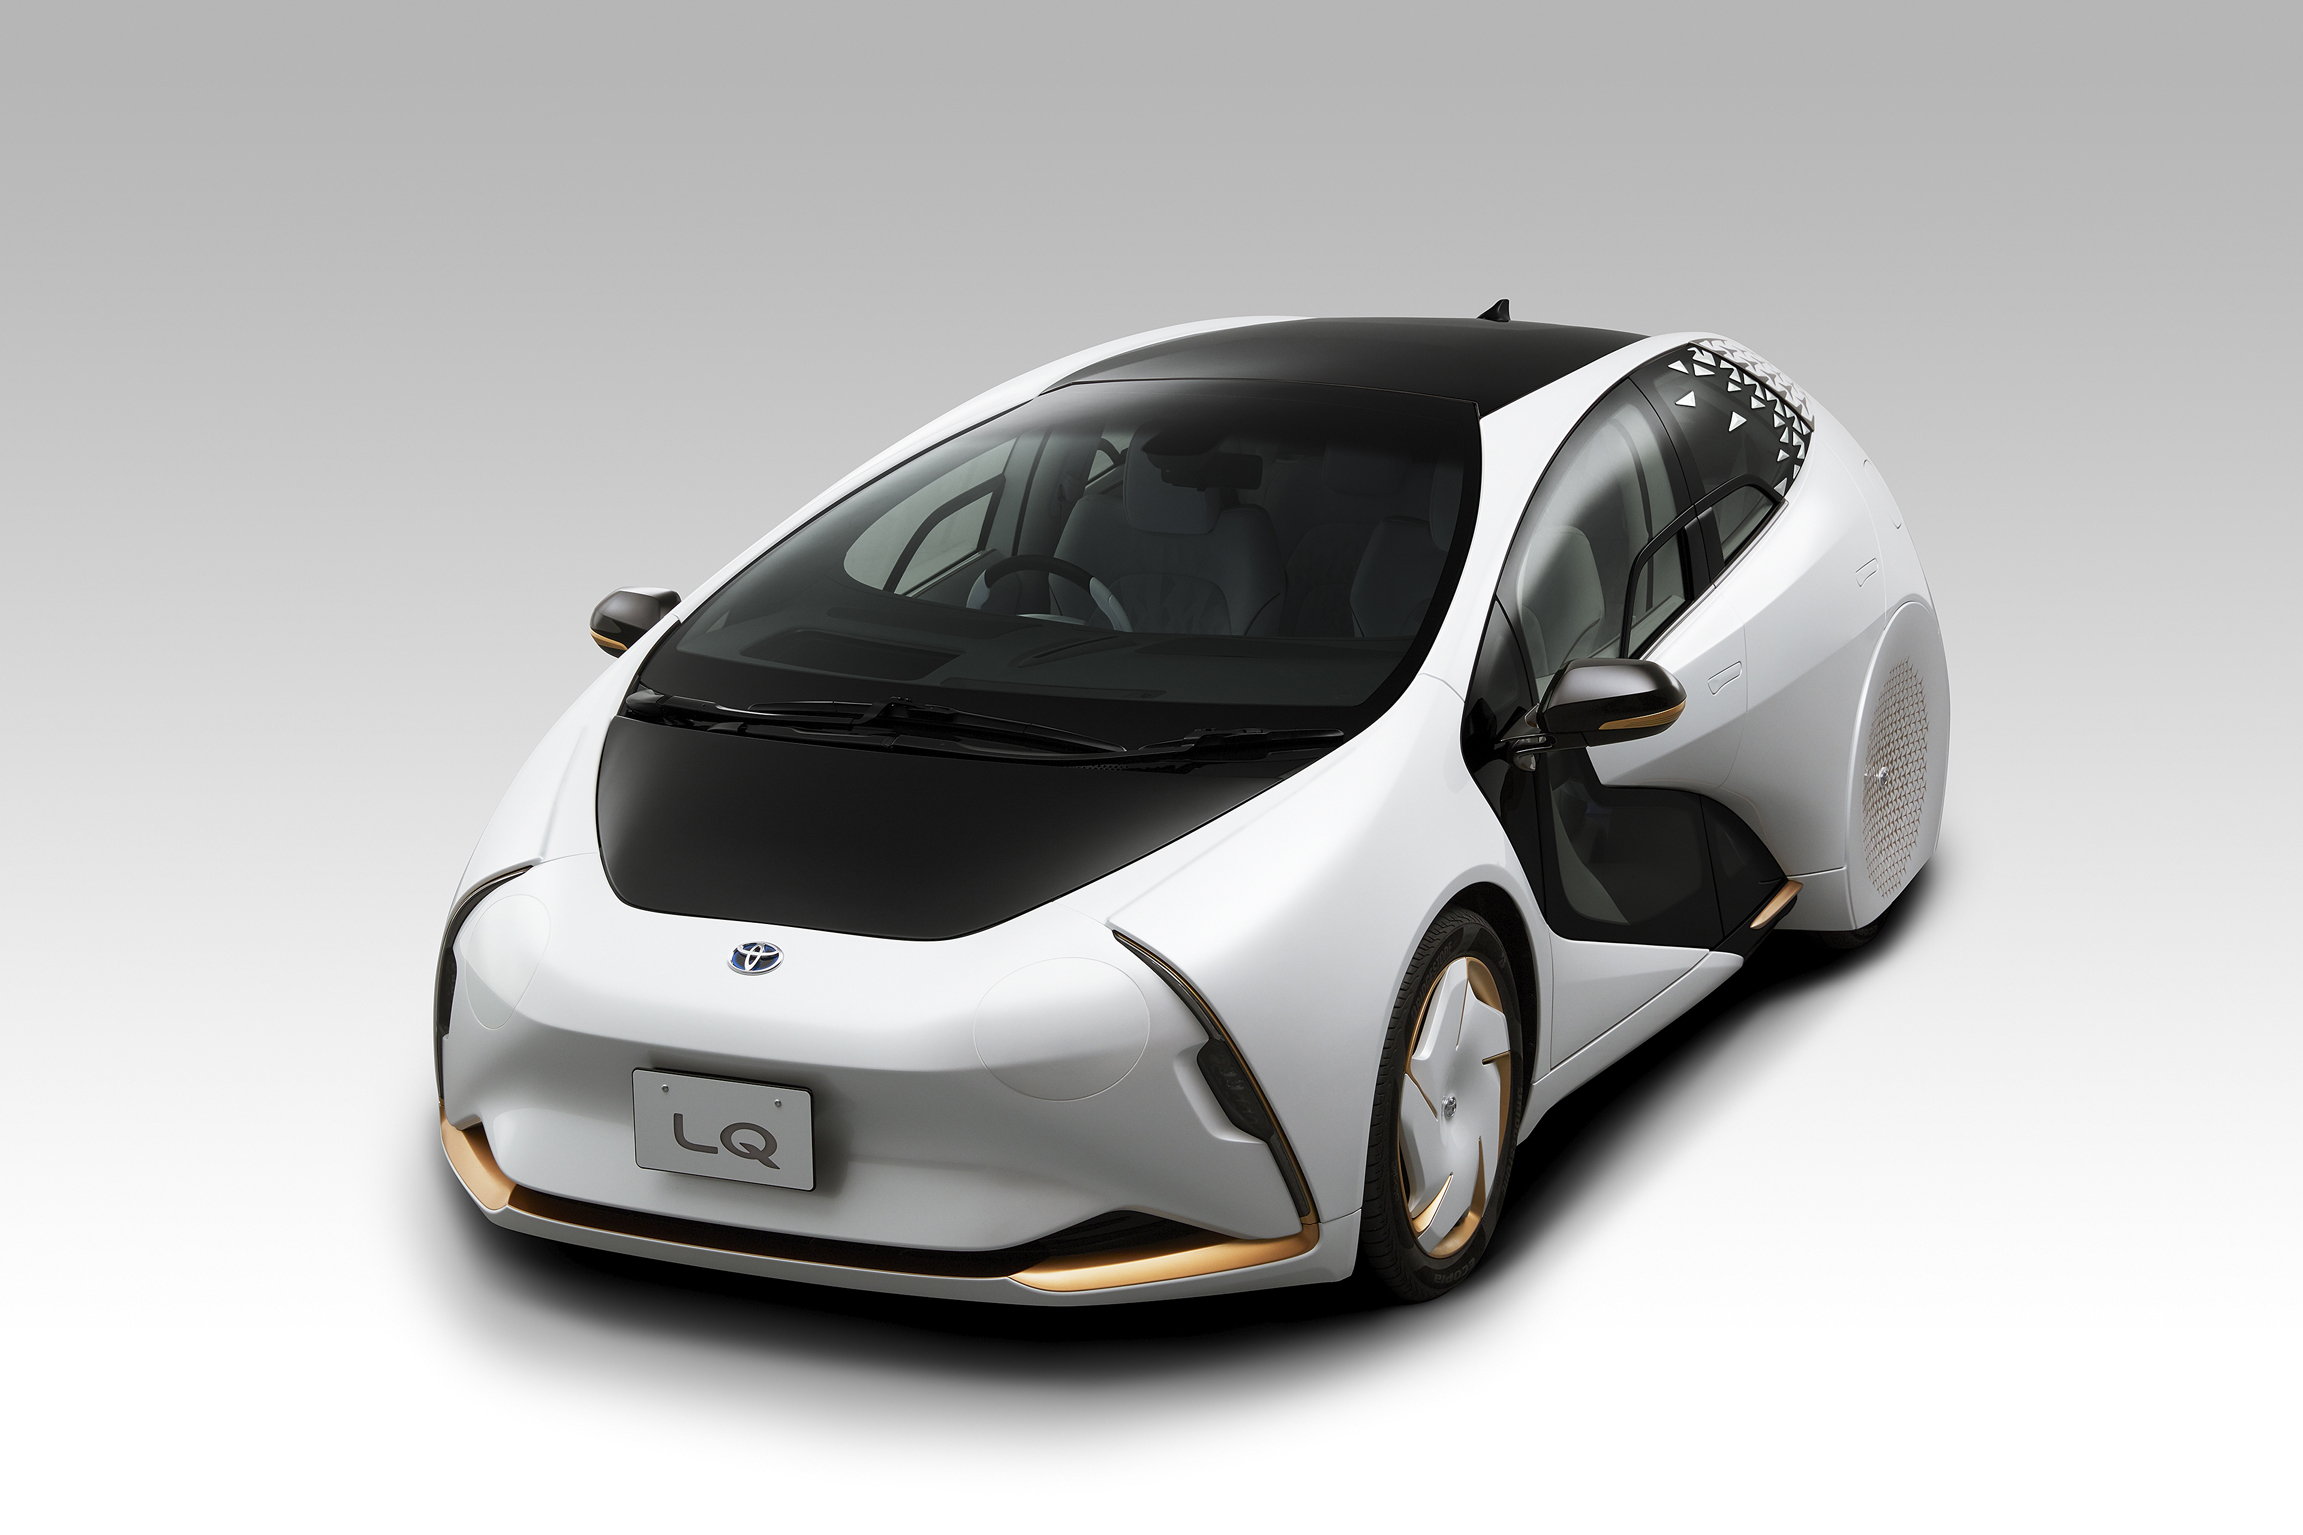 Toyota selected Covestro as its partner to develop a lightweight polyurethane composite material for its LQ car.